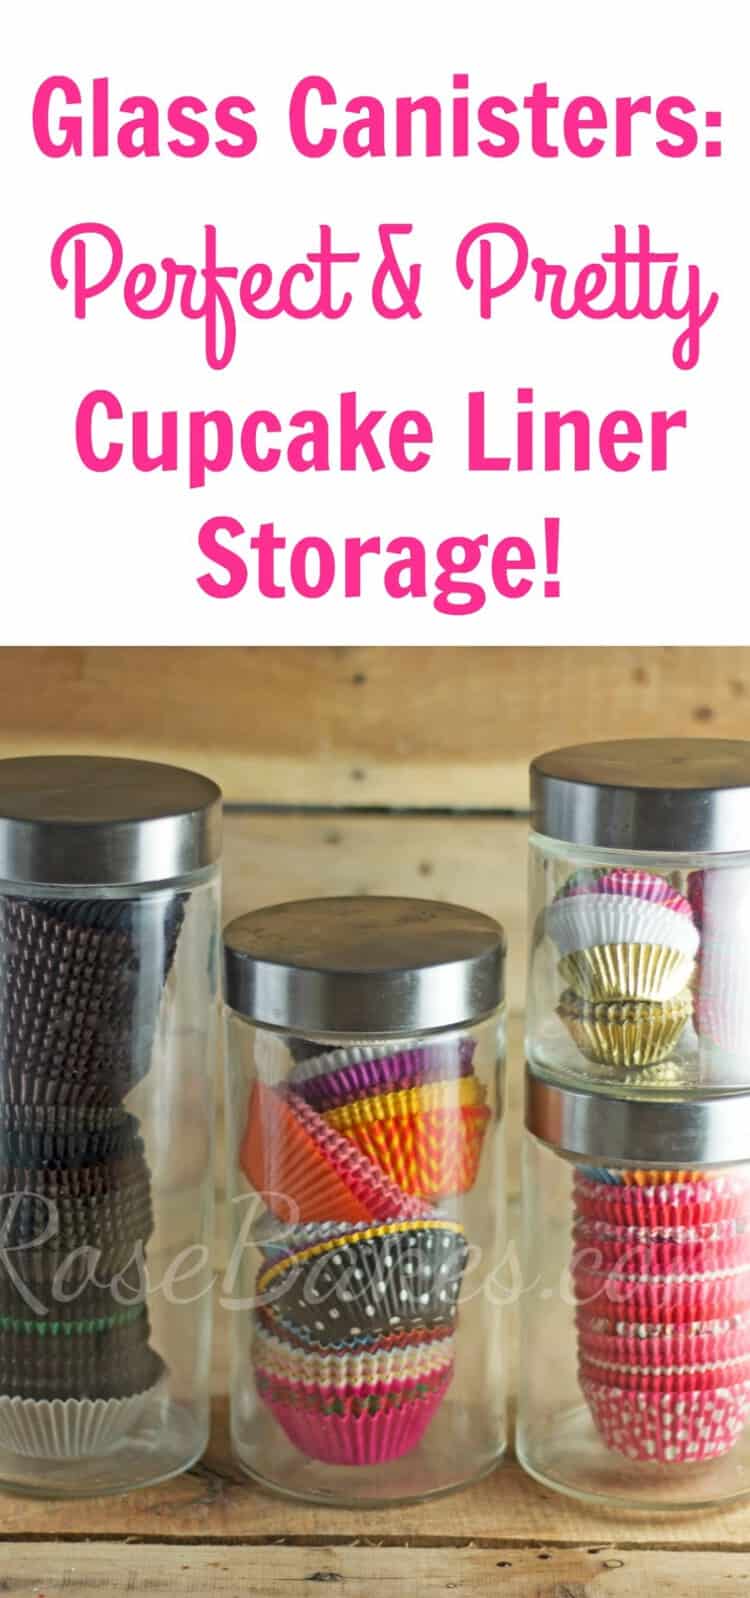 Glass Containers Perfect and Pretty Cupcake Liner Storage